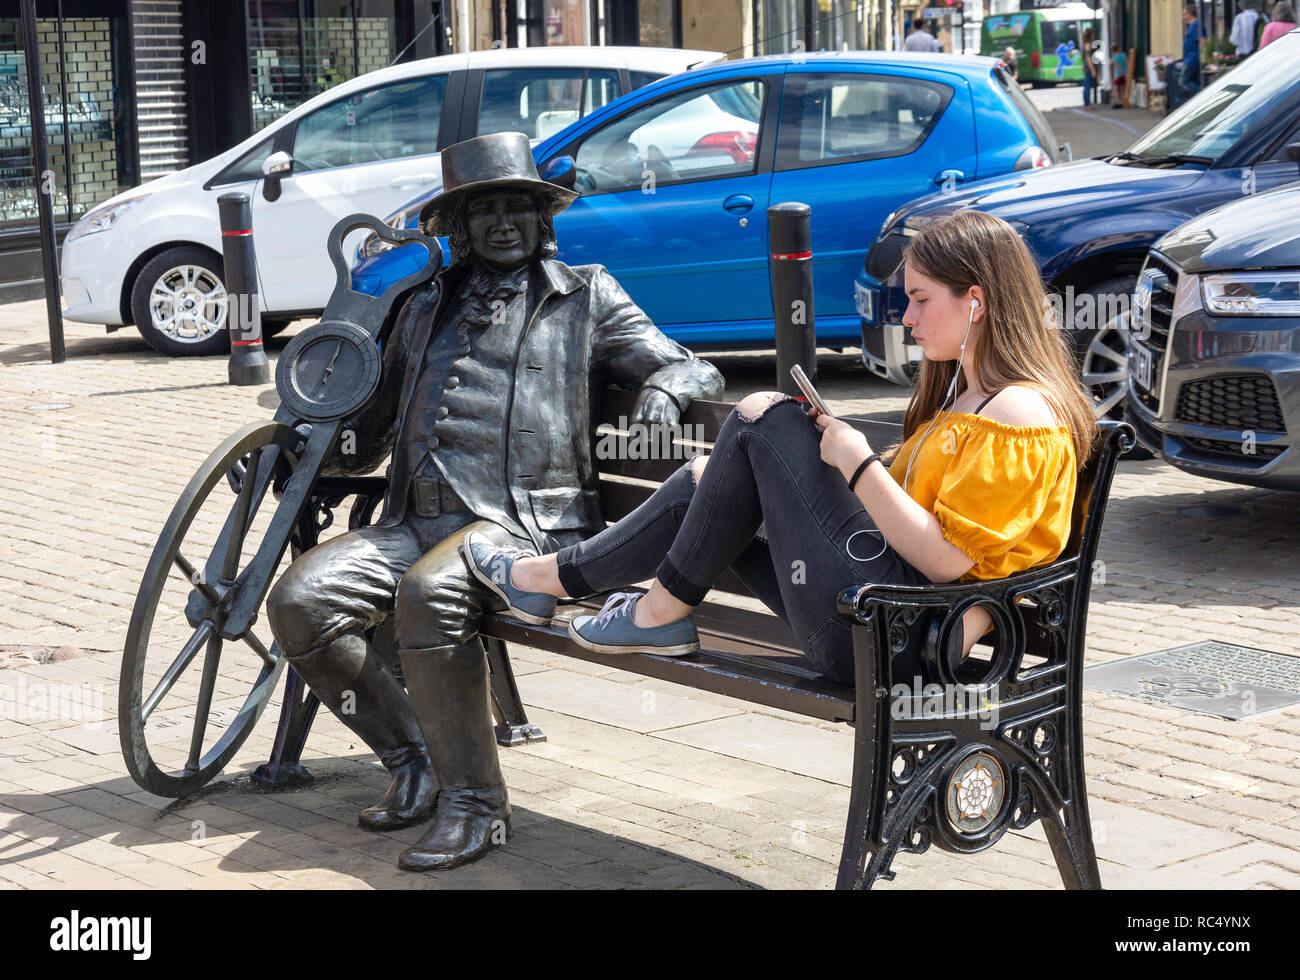 Young woman sitting on bench with historical figure, Market Place, Knaresborough, North Yorkshire, England, United Kingdom Stock Photo